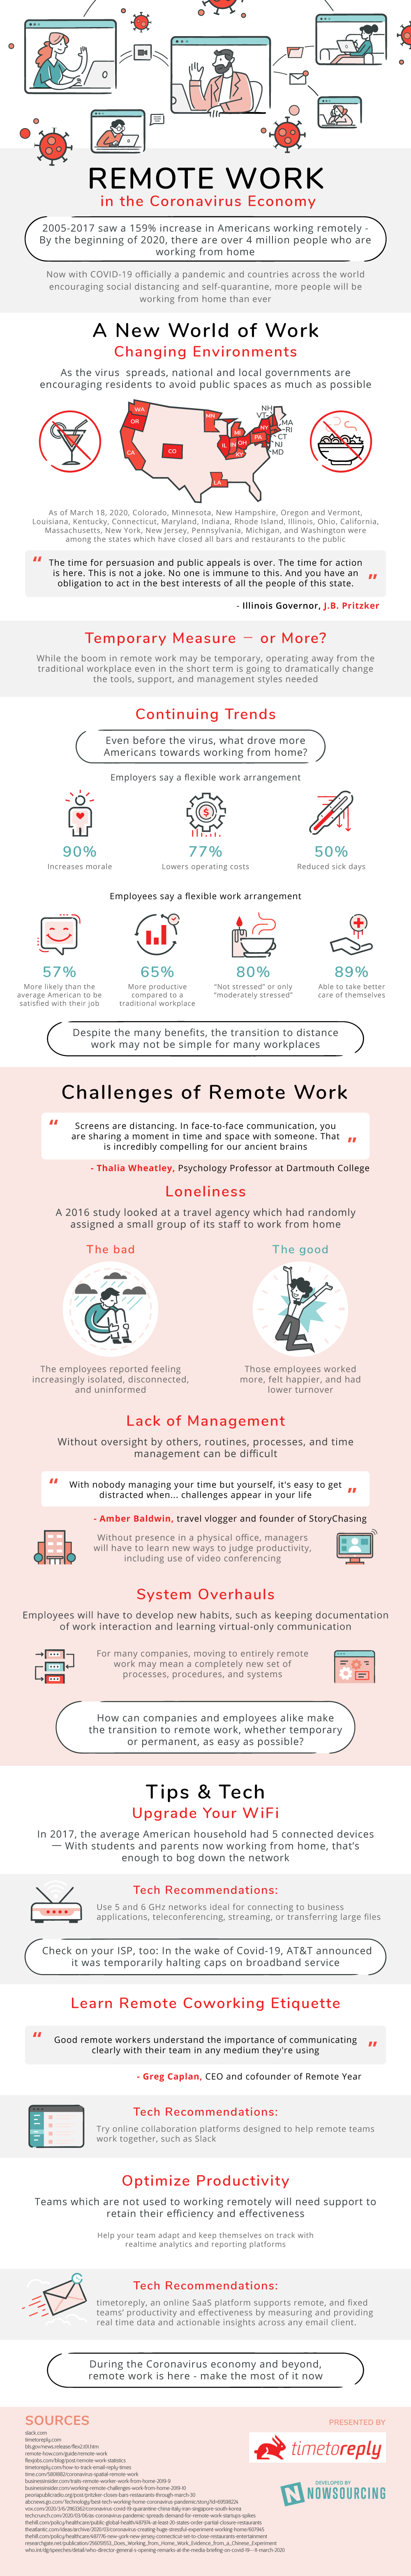 How To Make Remote Working Work [Infographic]